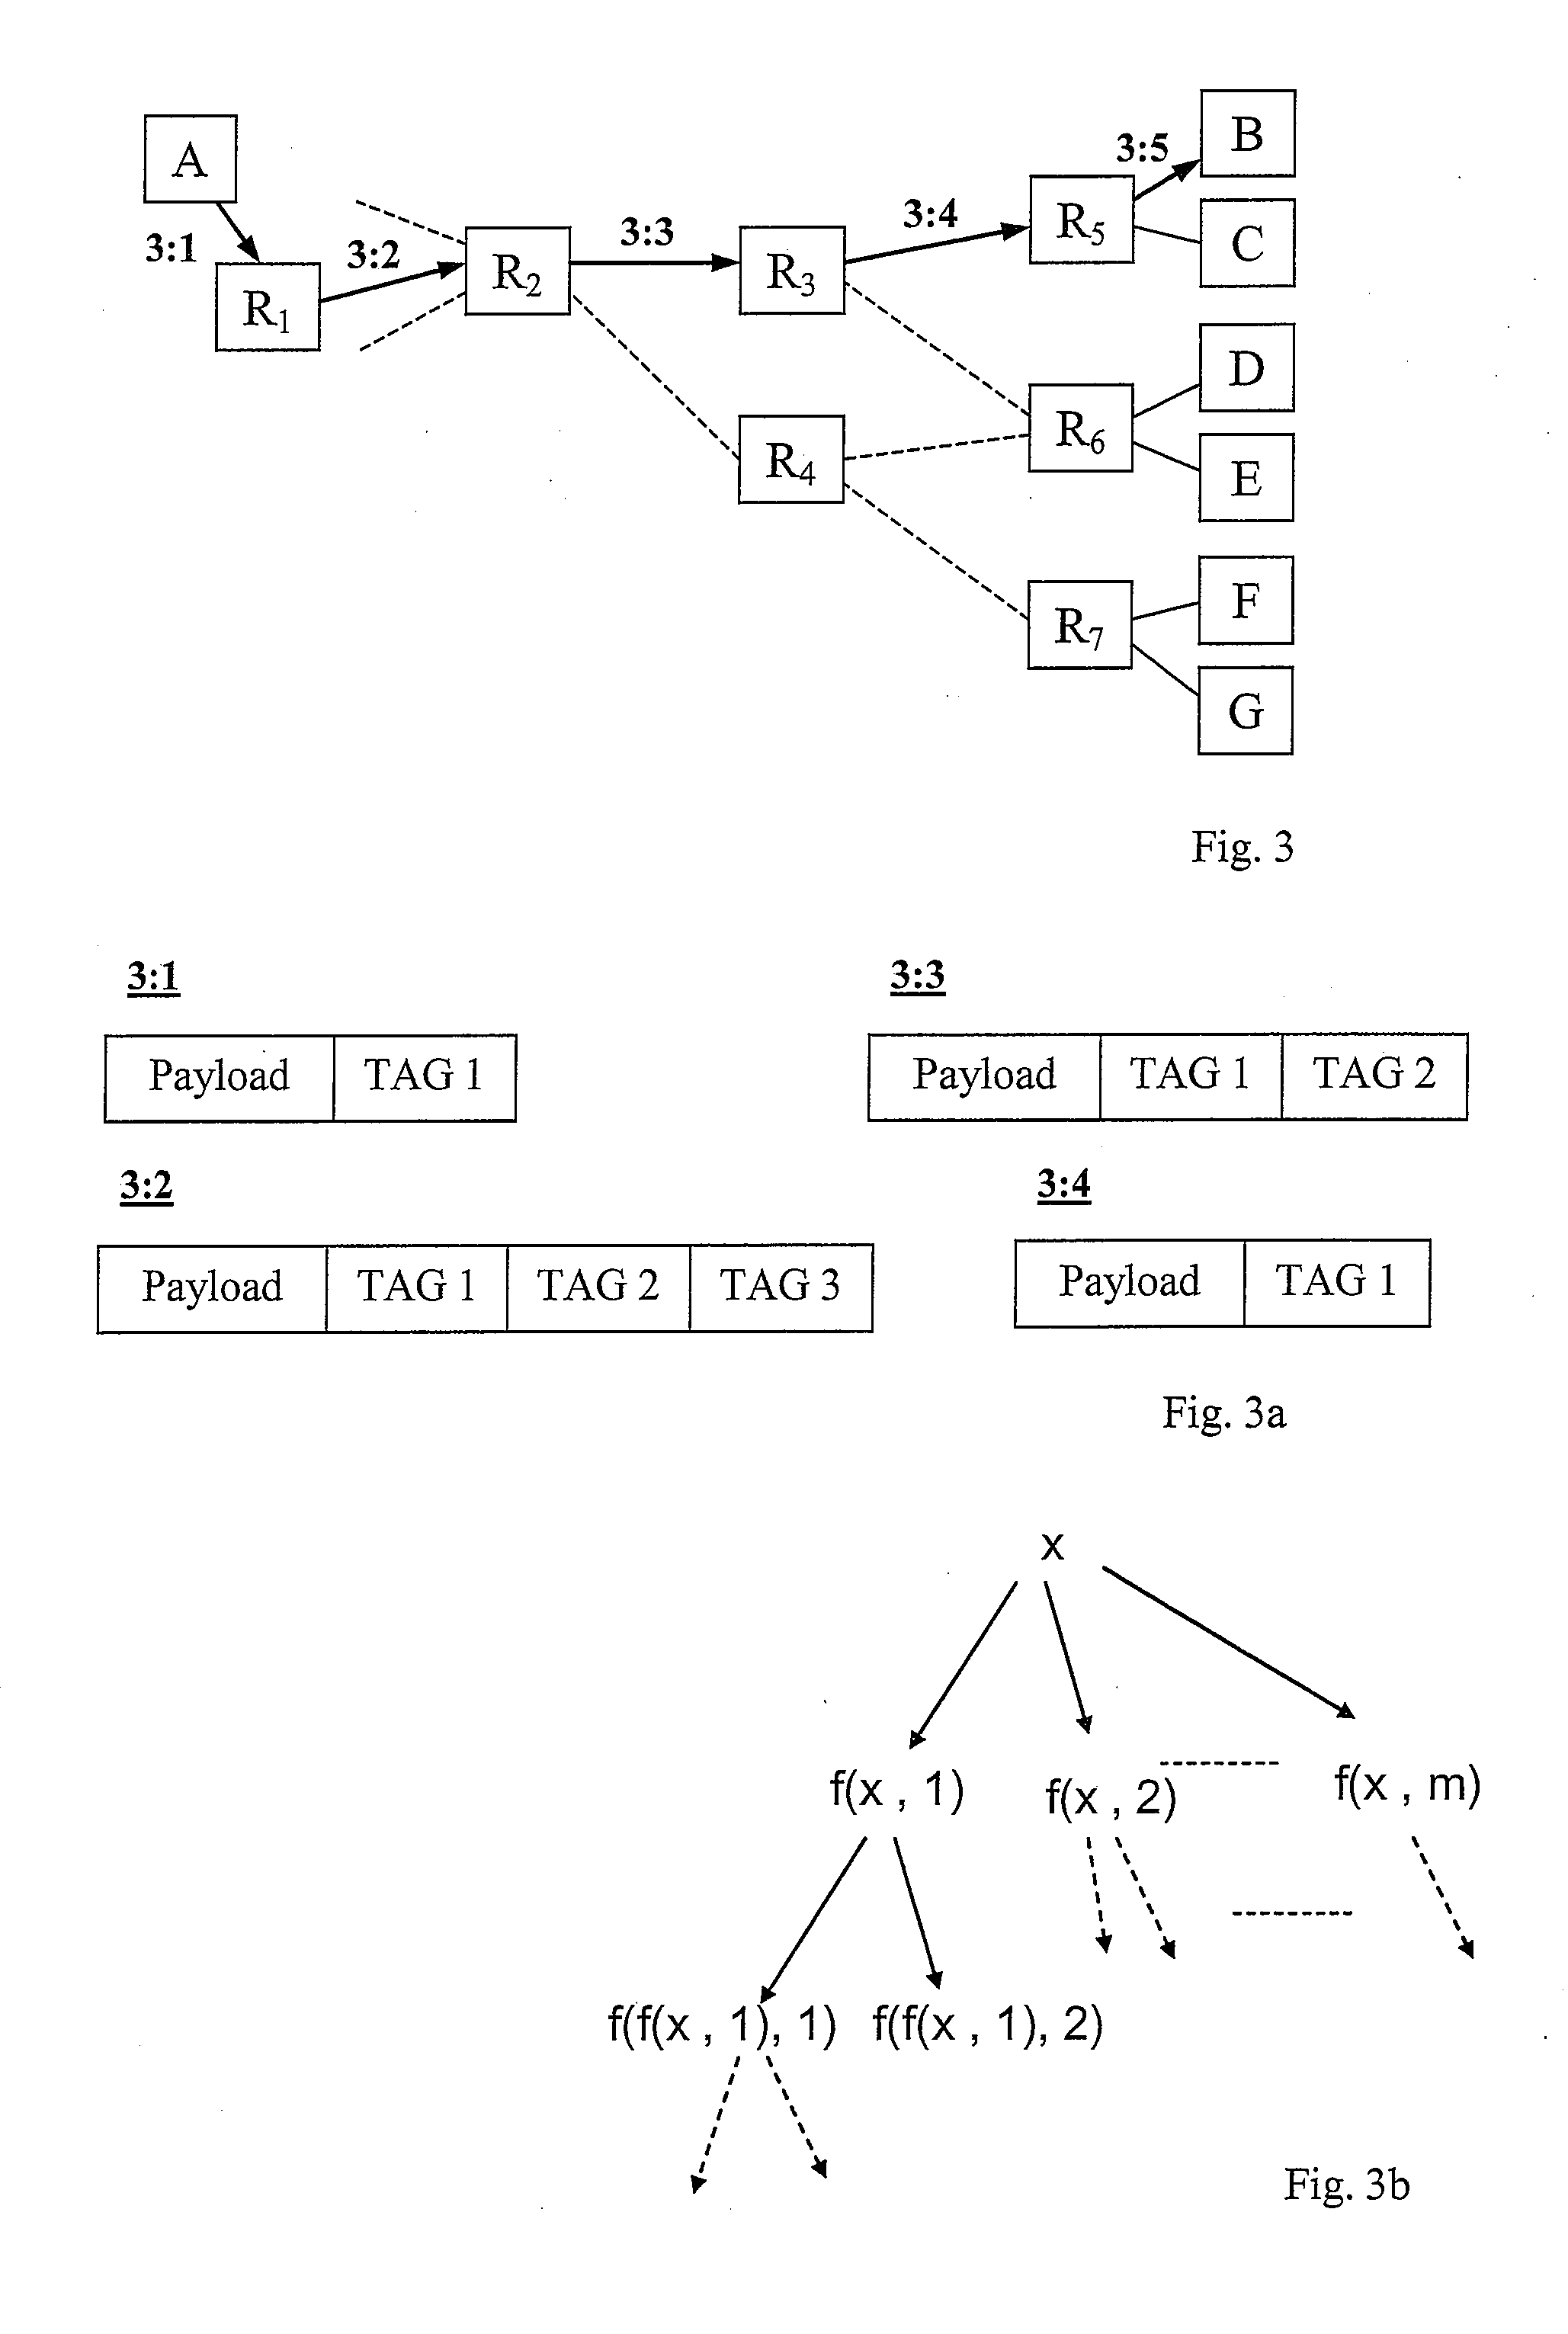 Method and Apparatus for Forwarding Data Packets using Aggregating Router Keys